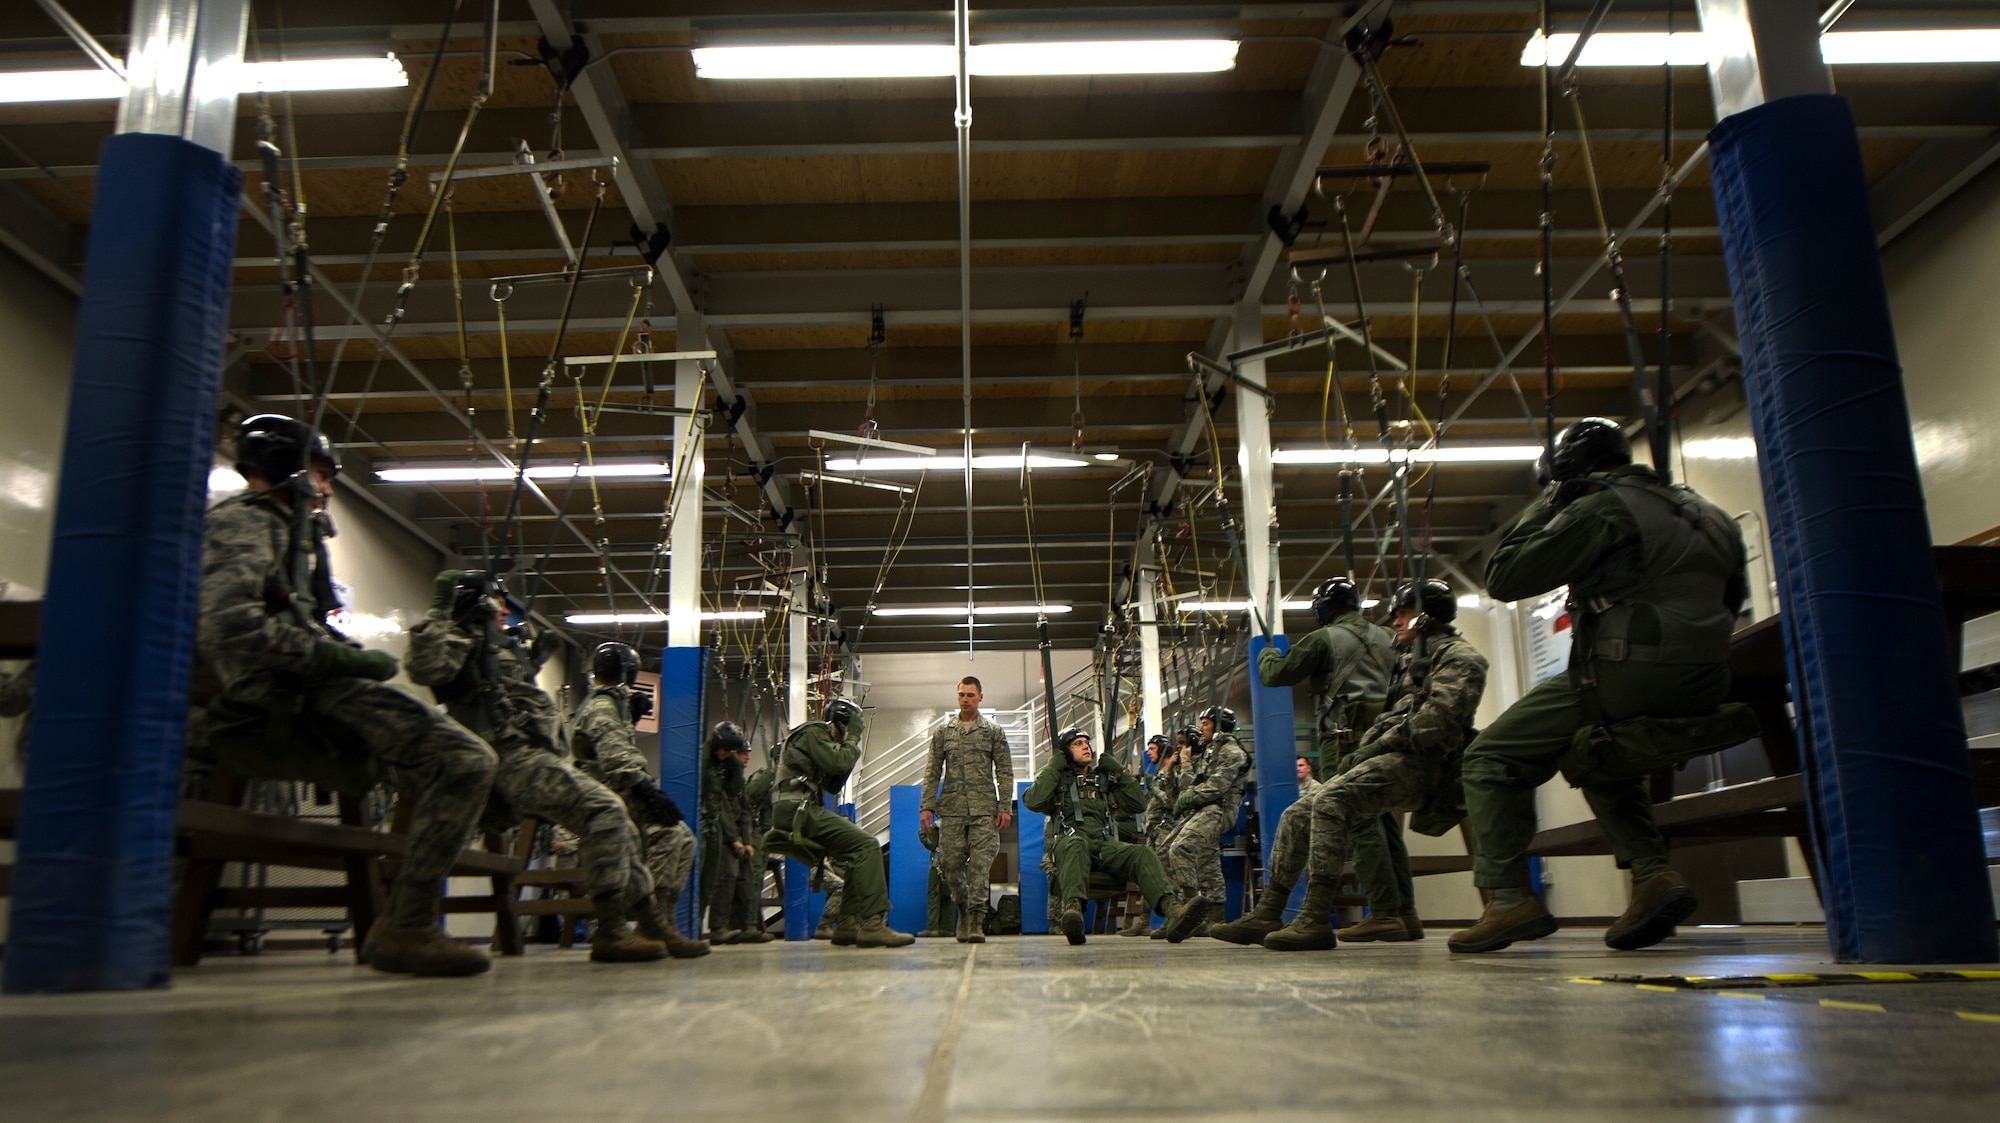 Senior Airman Nathan Zeiger, 22nd Training Squadron Survival, Evasion, Resistance and Escape specialist, instructs a parachuting lab May 26, 2016, at Fairchild Air Force Base, Wash. The last step of the training is where students learn how to fall. They are instructed on proper falling procedures that include keeping the feet and knees together and making five points of contact when hitting the ground. (U.S. Air Force photo/Airman 1st Class Sean Campbell)

